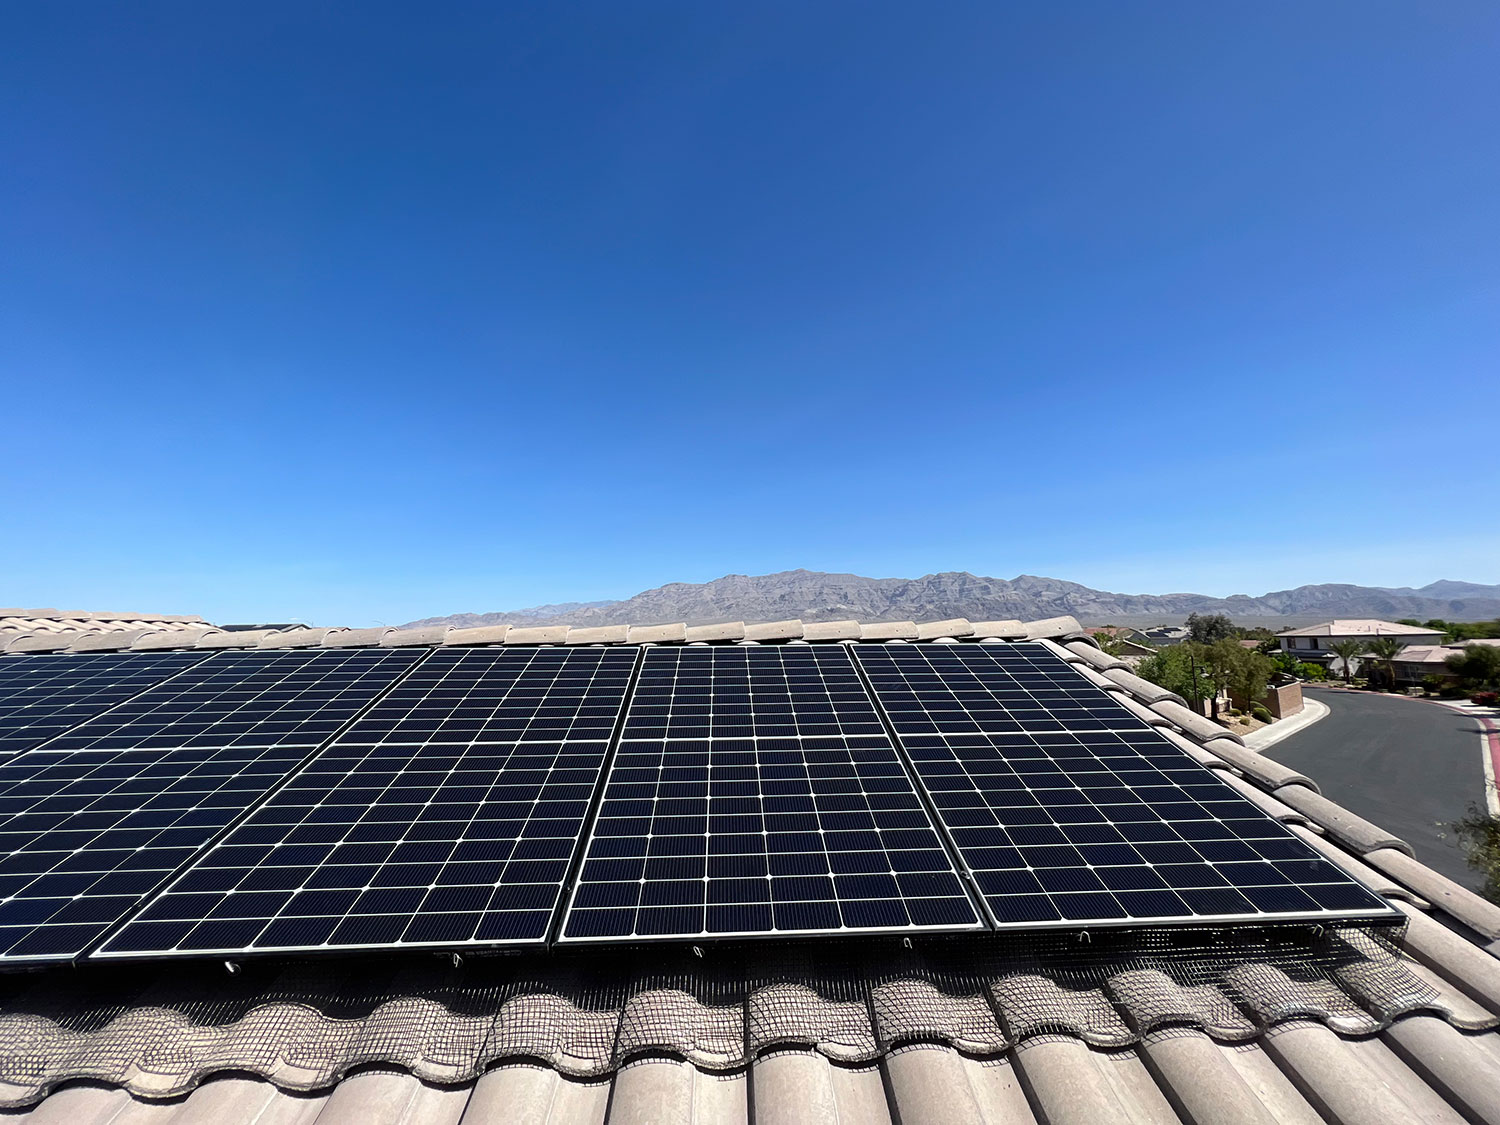 Sol-Up, solar services, Green Valley South, Southern Nevada, sunlight, energy efficiency, climate, sustainable energy, renewable energy, solar power solutions